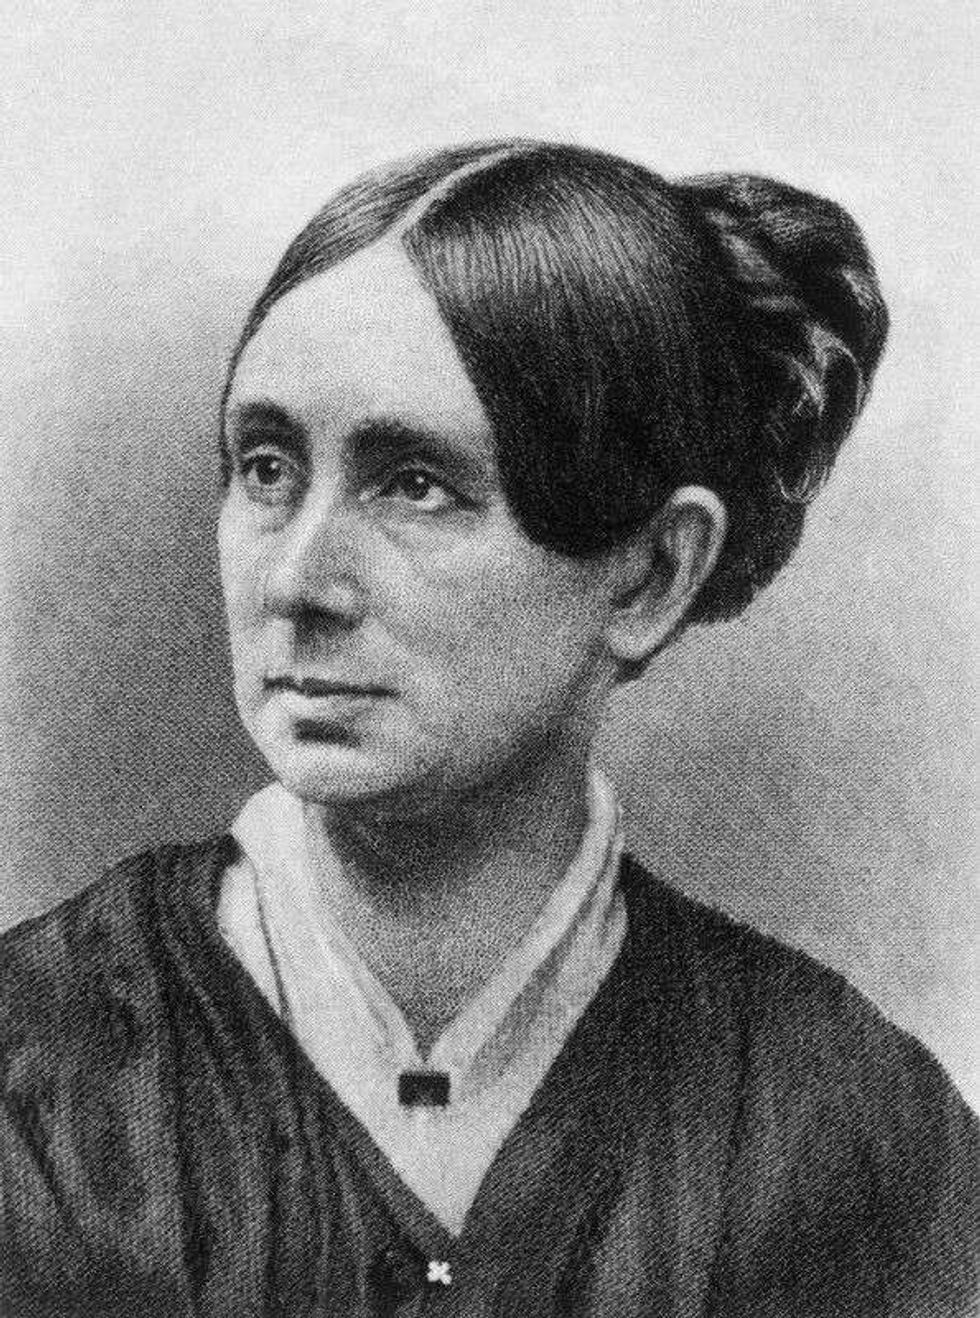 Here, at Kidadl, you will learn all the exciting facts about the famous civil rights leader, Dorothea Dix.